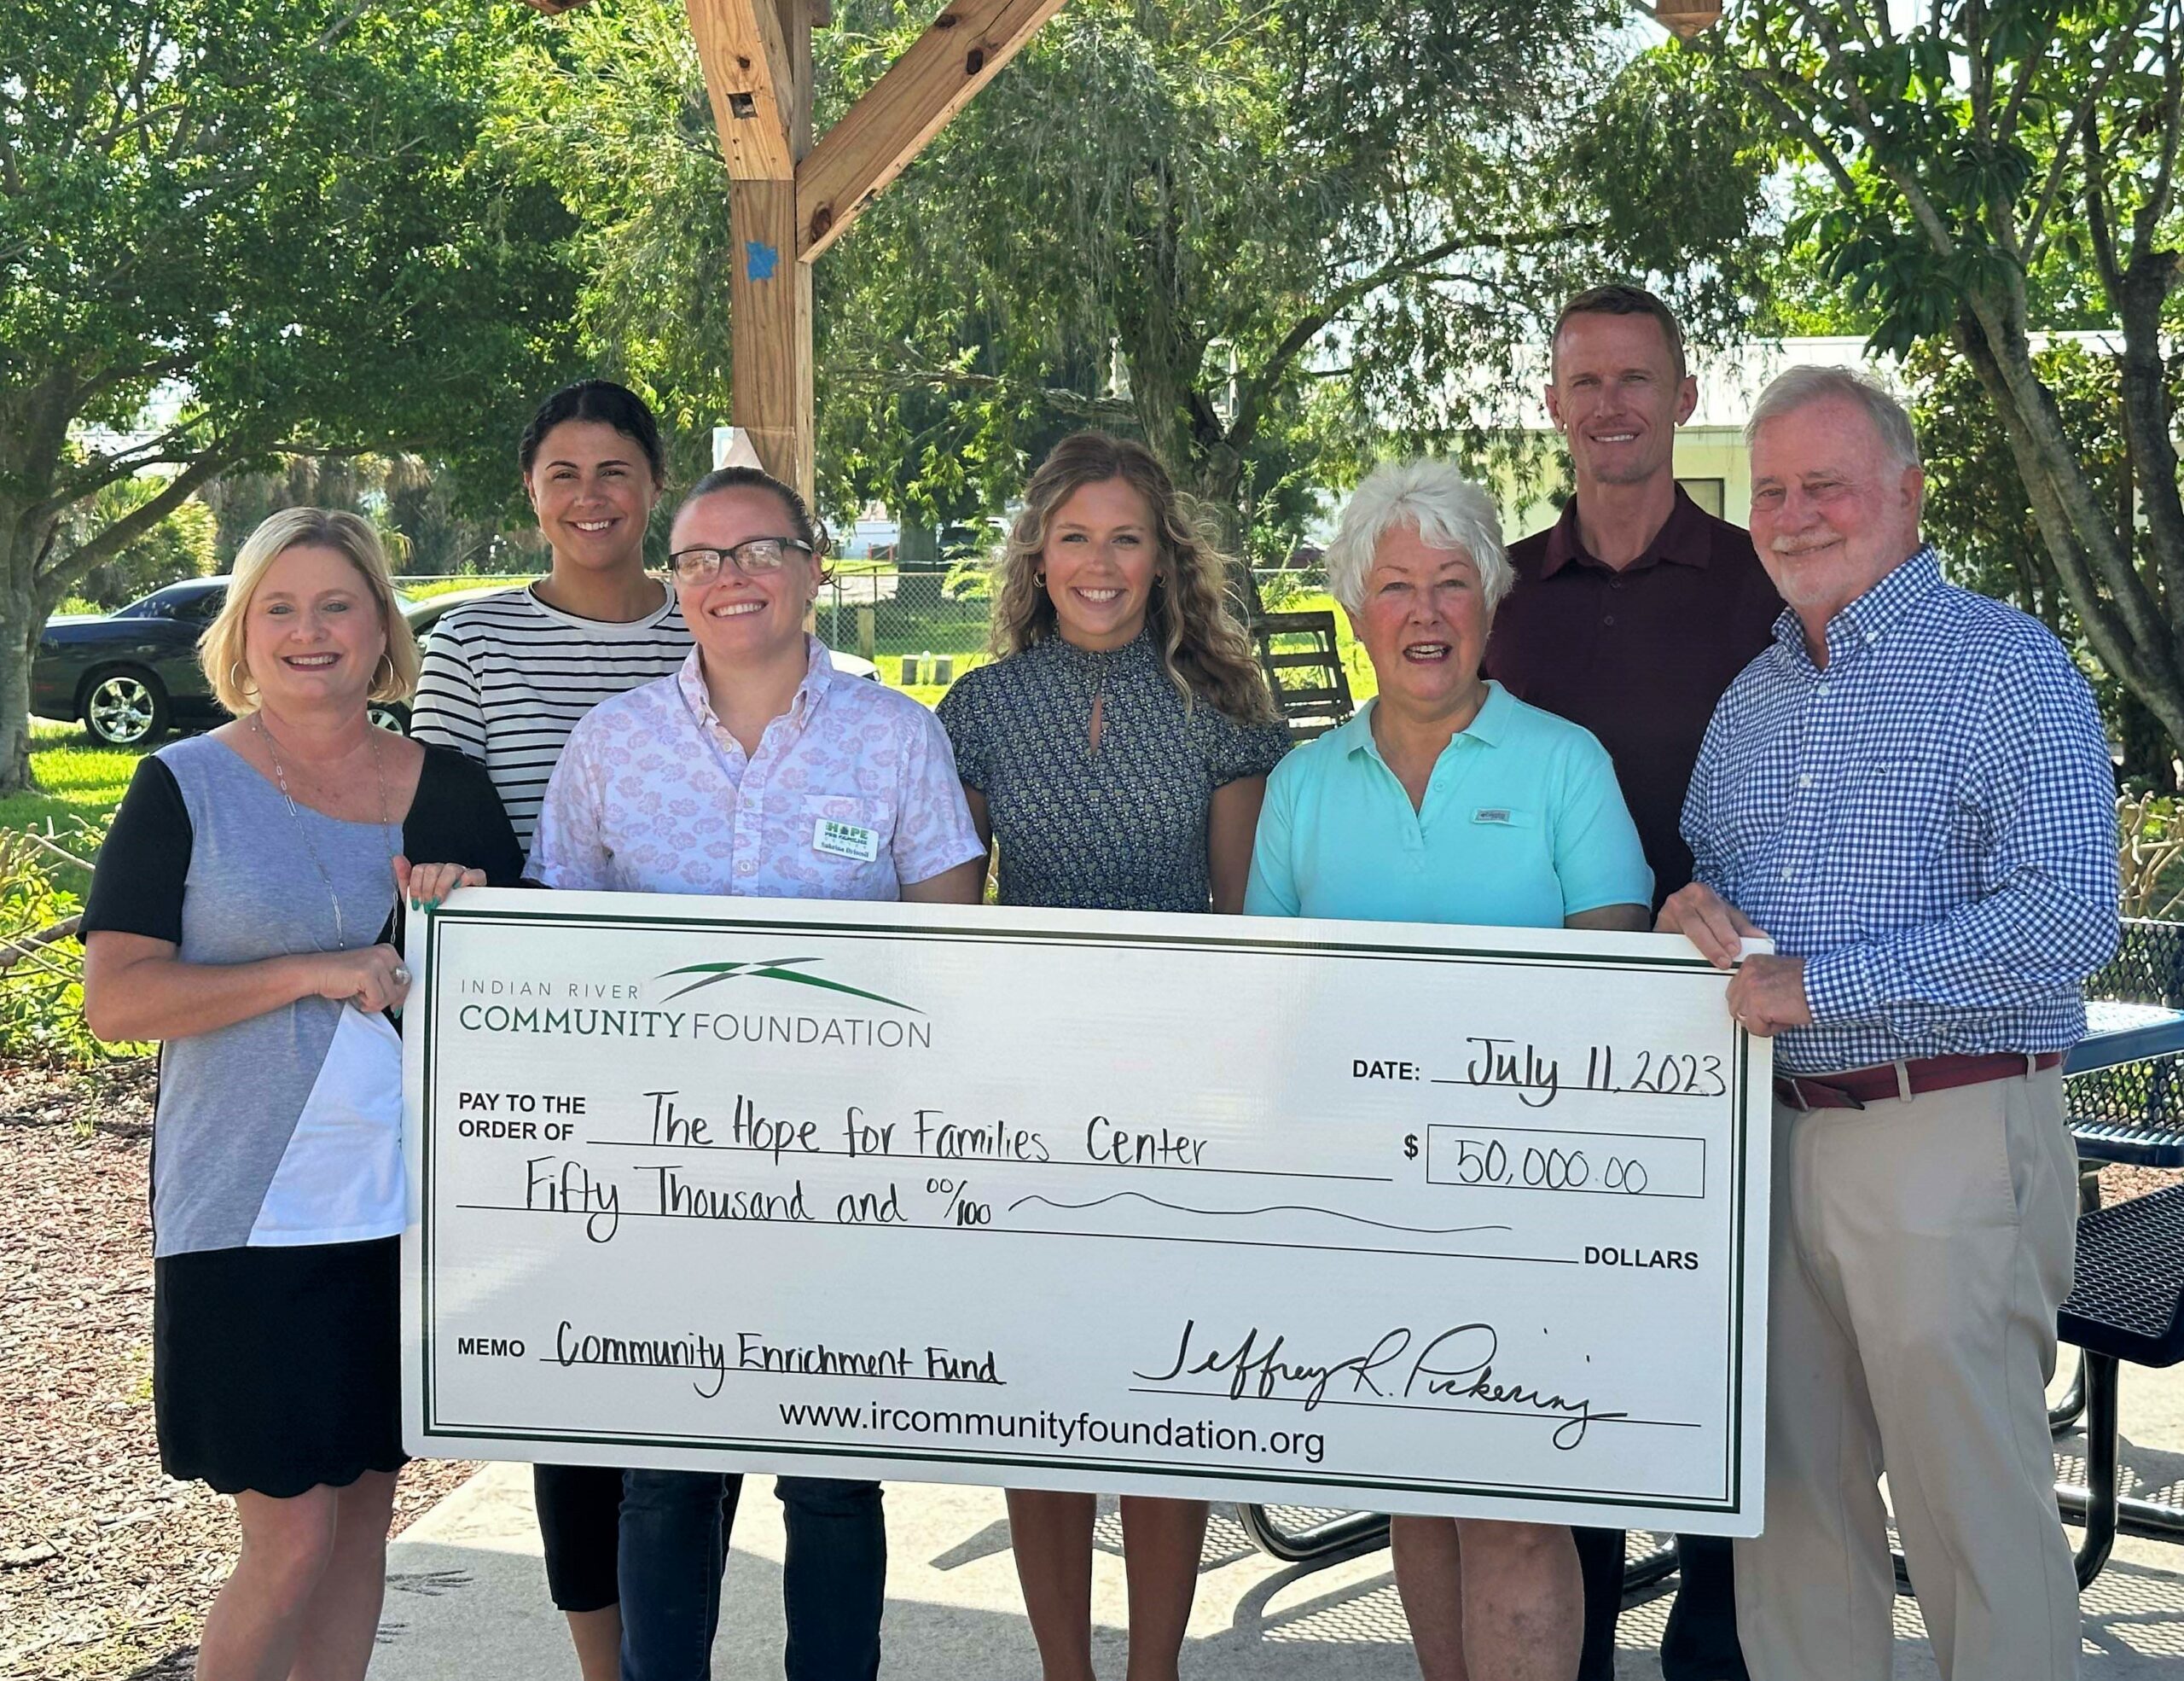 IRCF Awards The Hope for Families Center $50,000